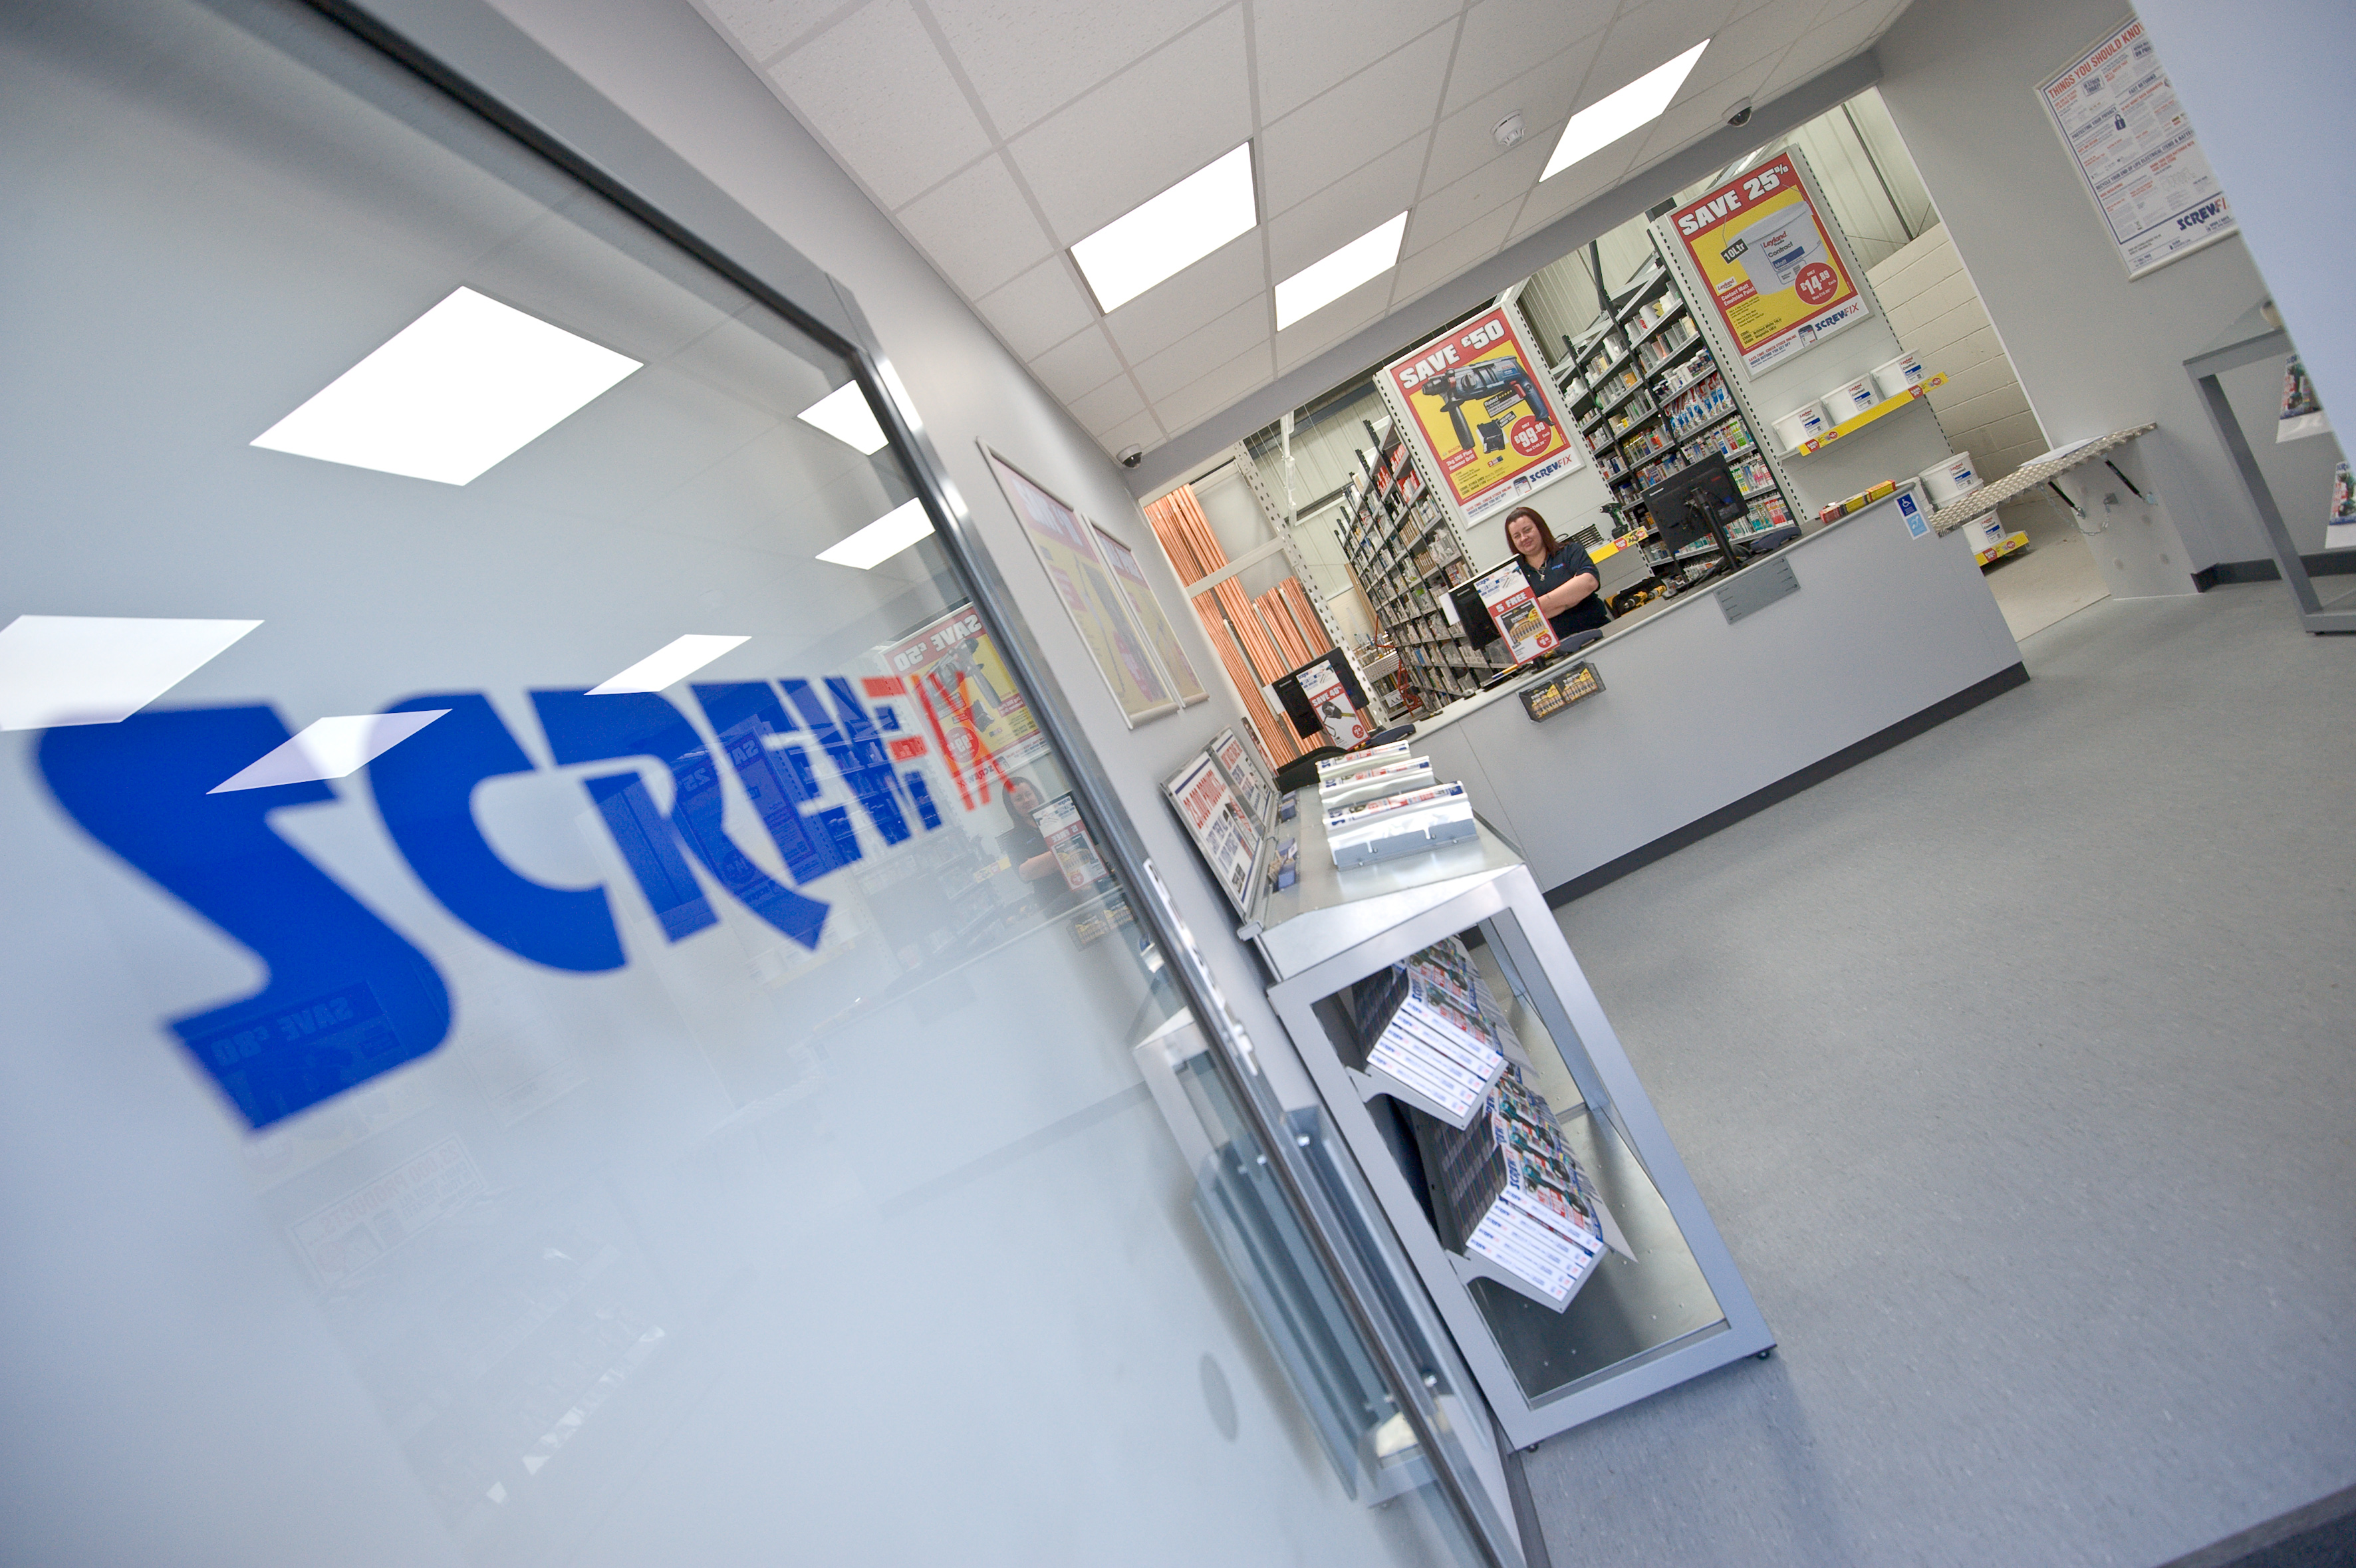 Continued growth for Screwfix delivers greater convenience